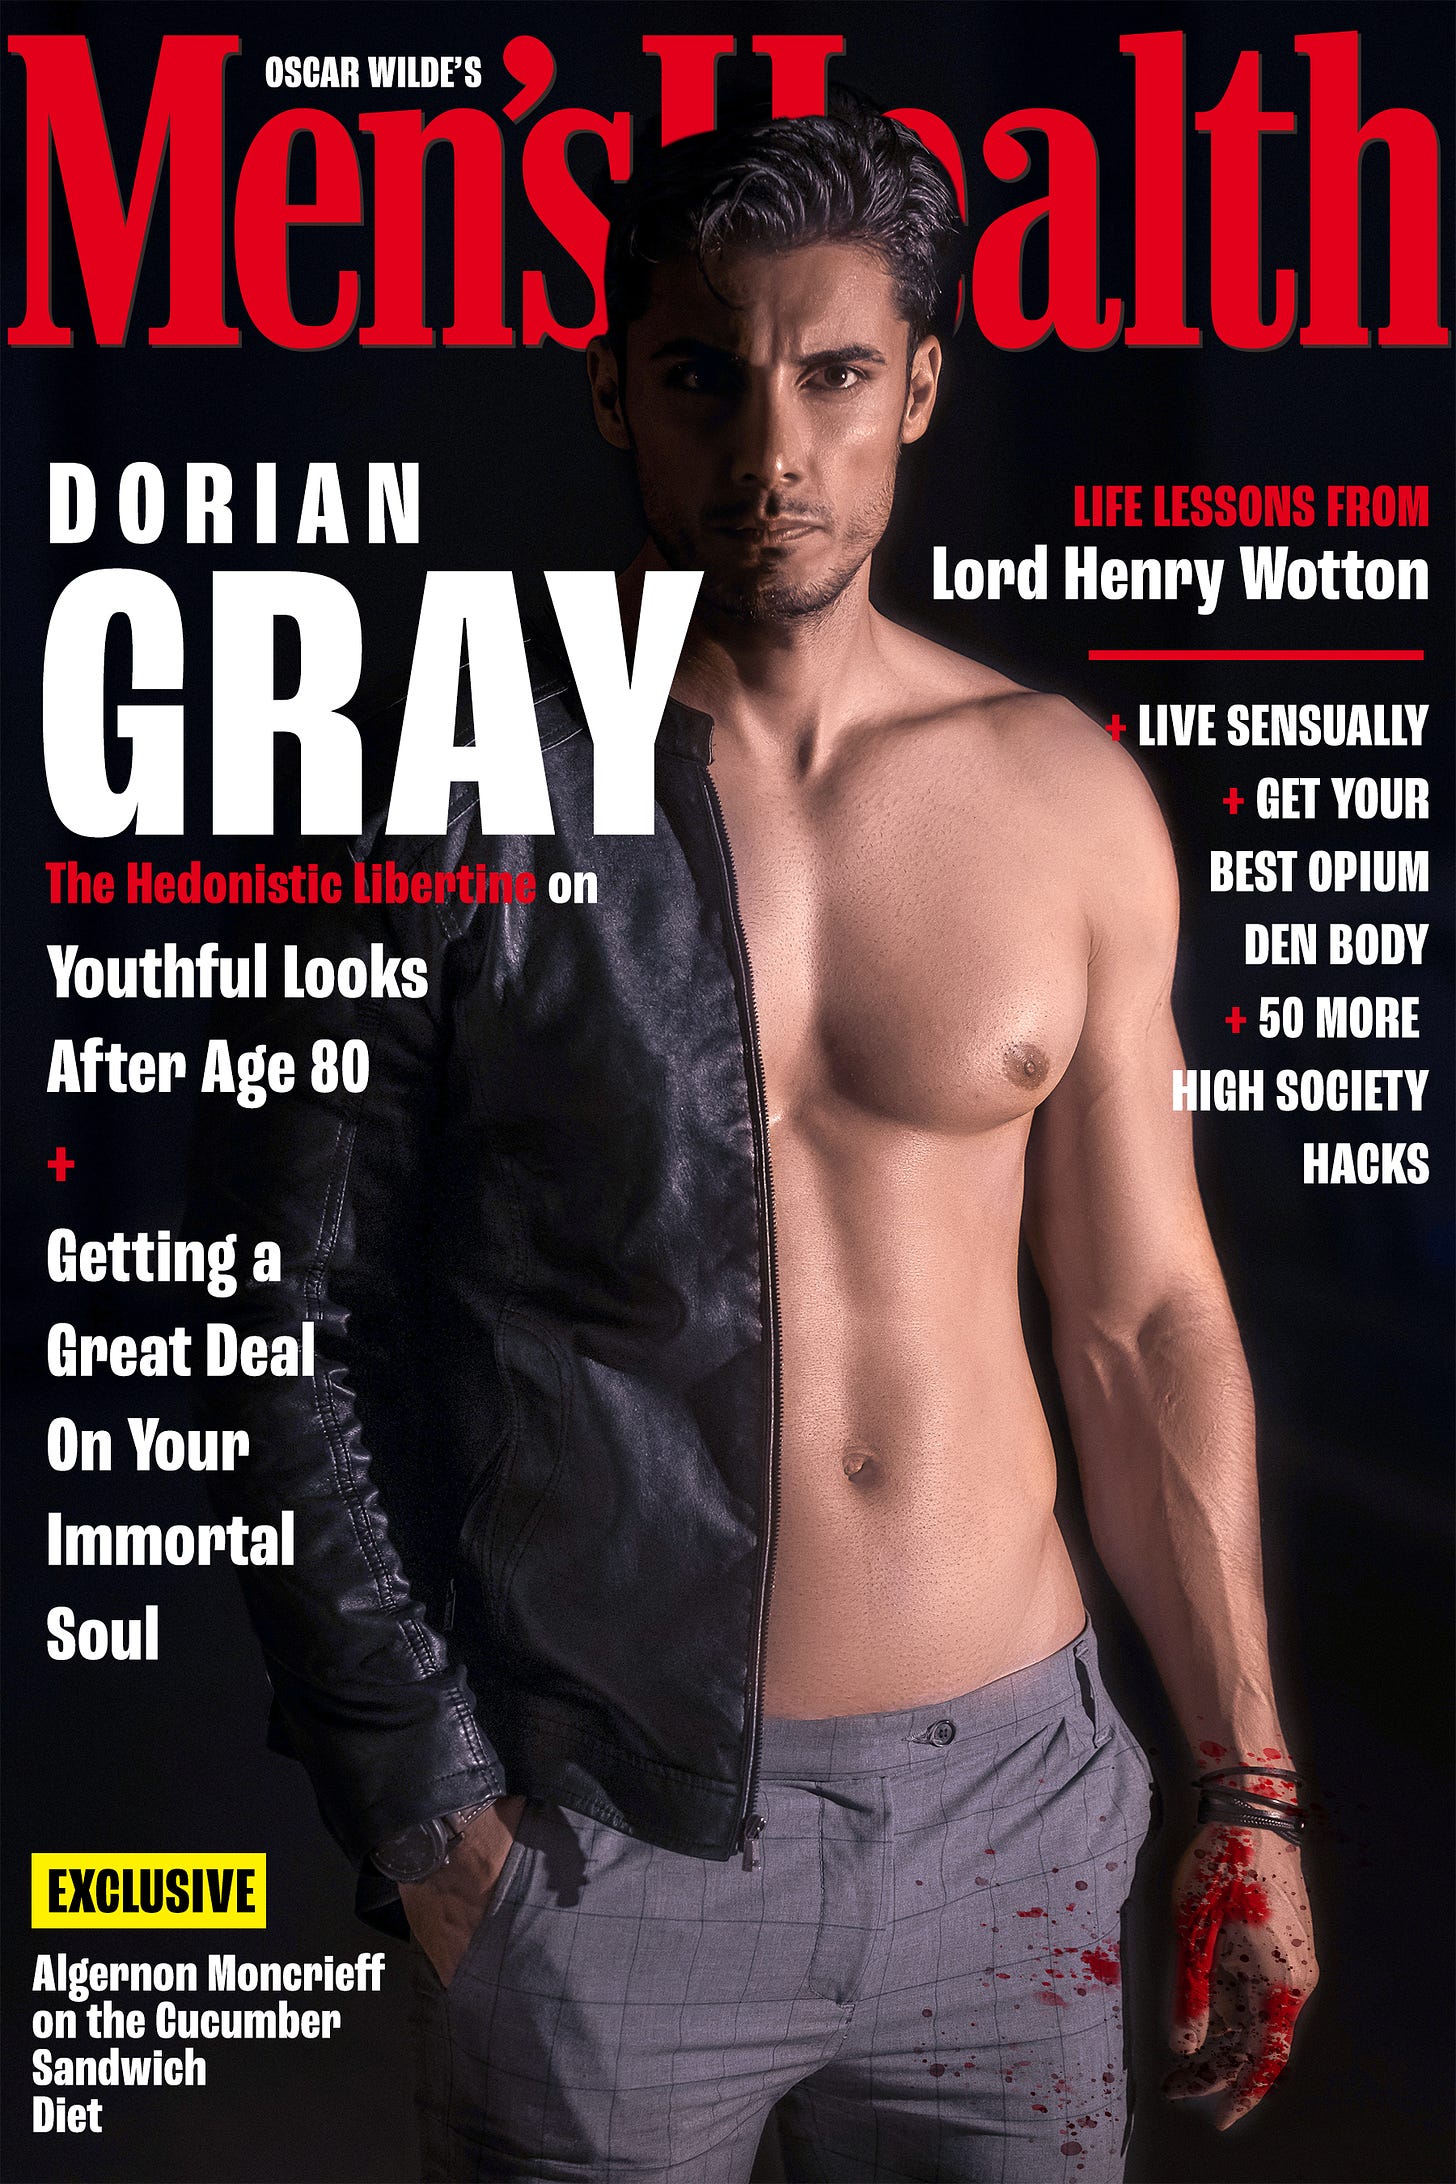 Men's health magazine featuring a shirtless young man with blood on his hands. The main story is about Dorian Gray, the rest of the text are clever references.